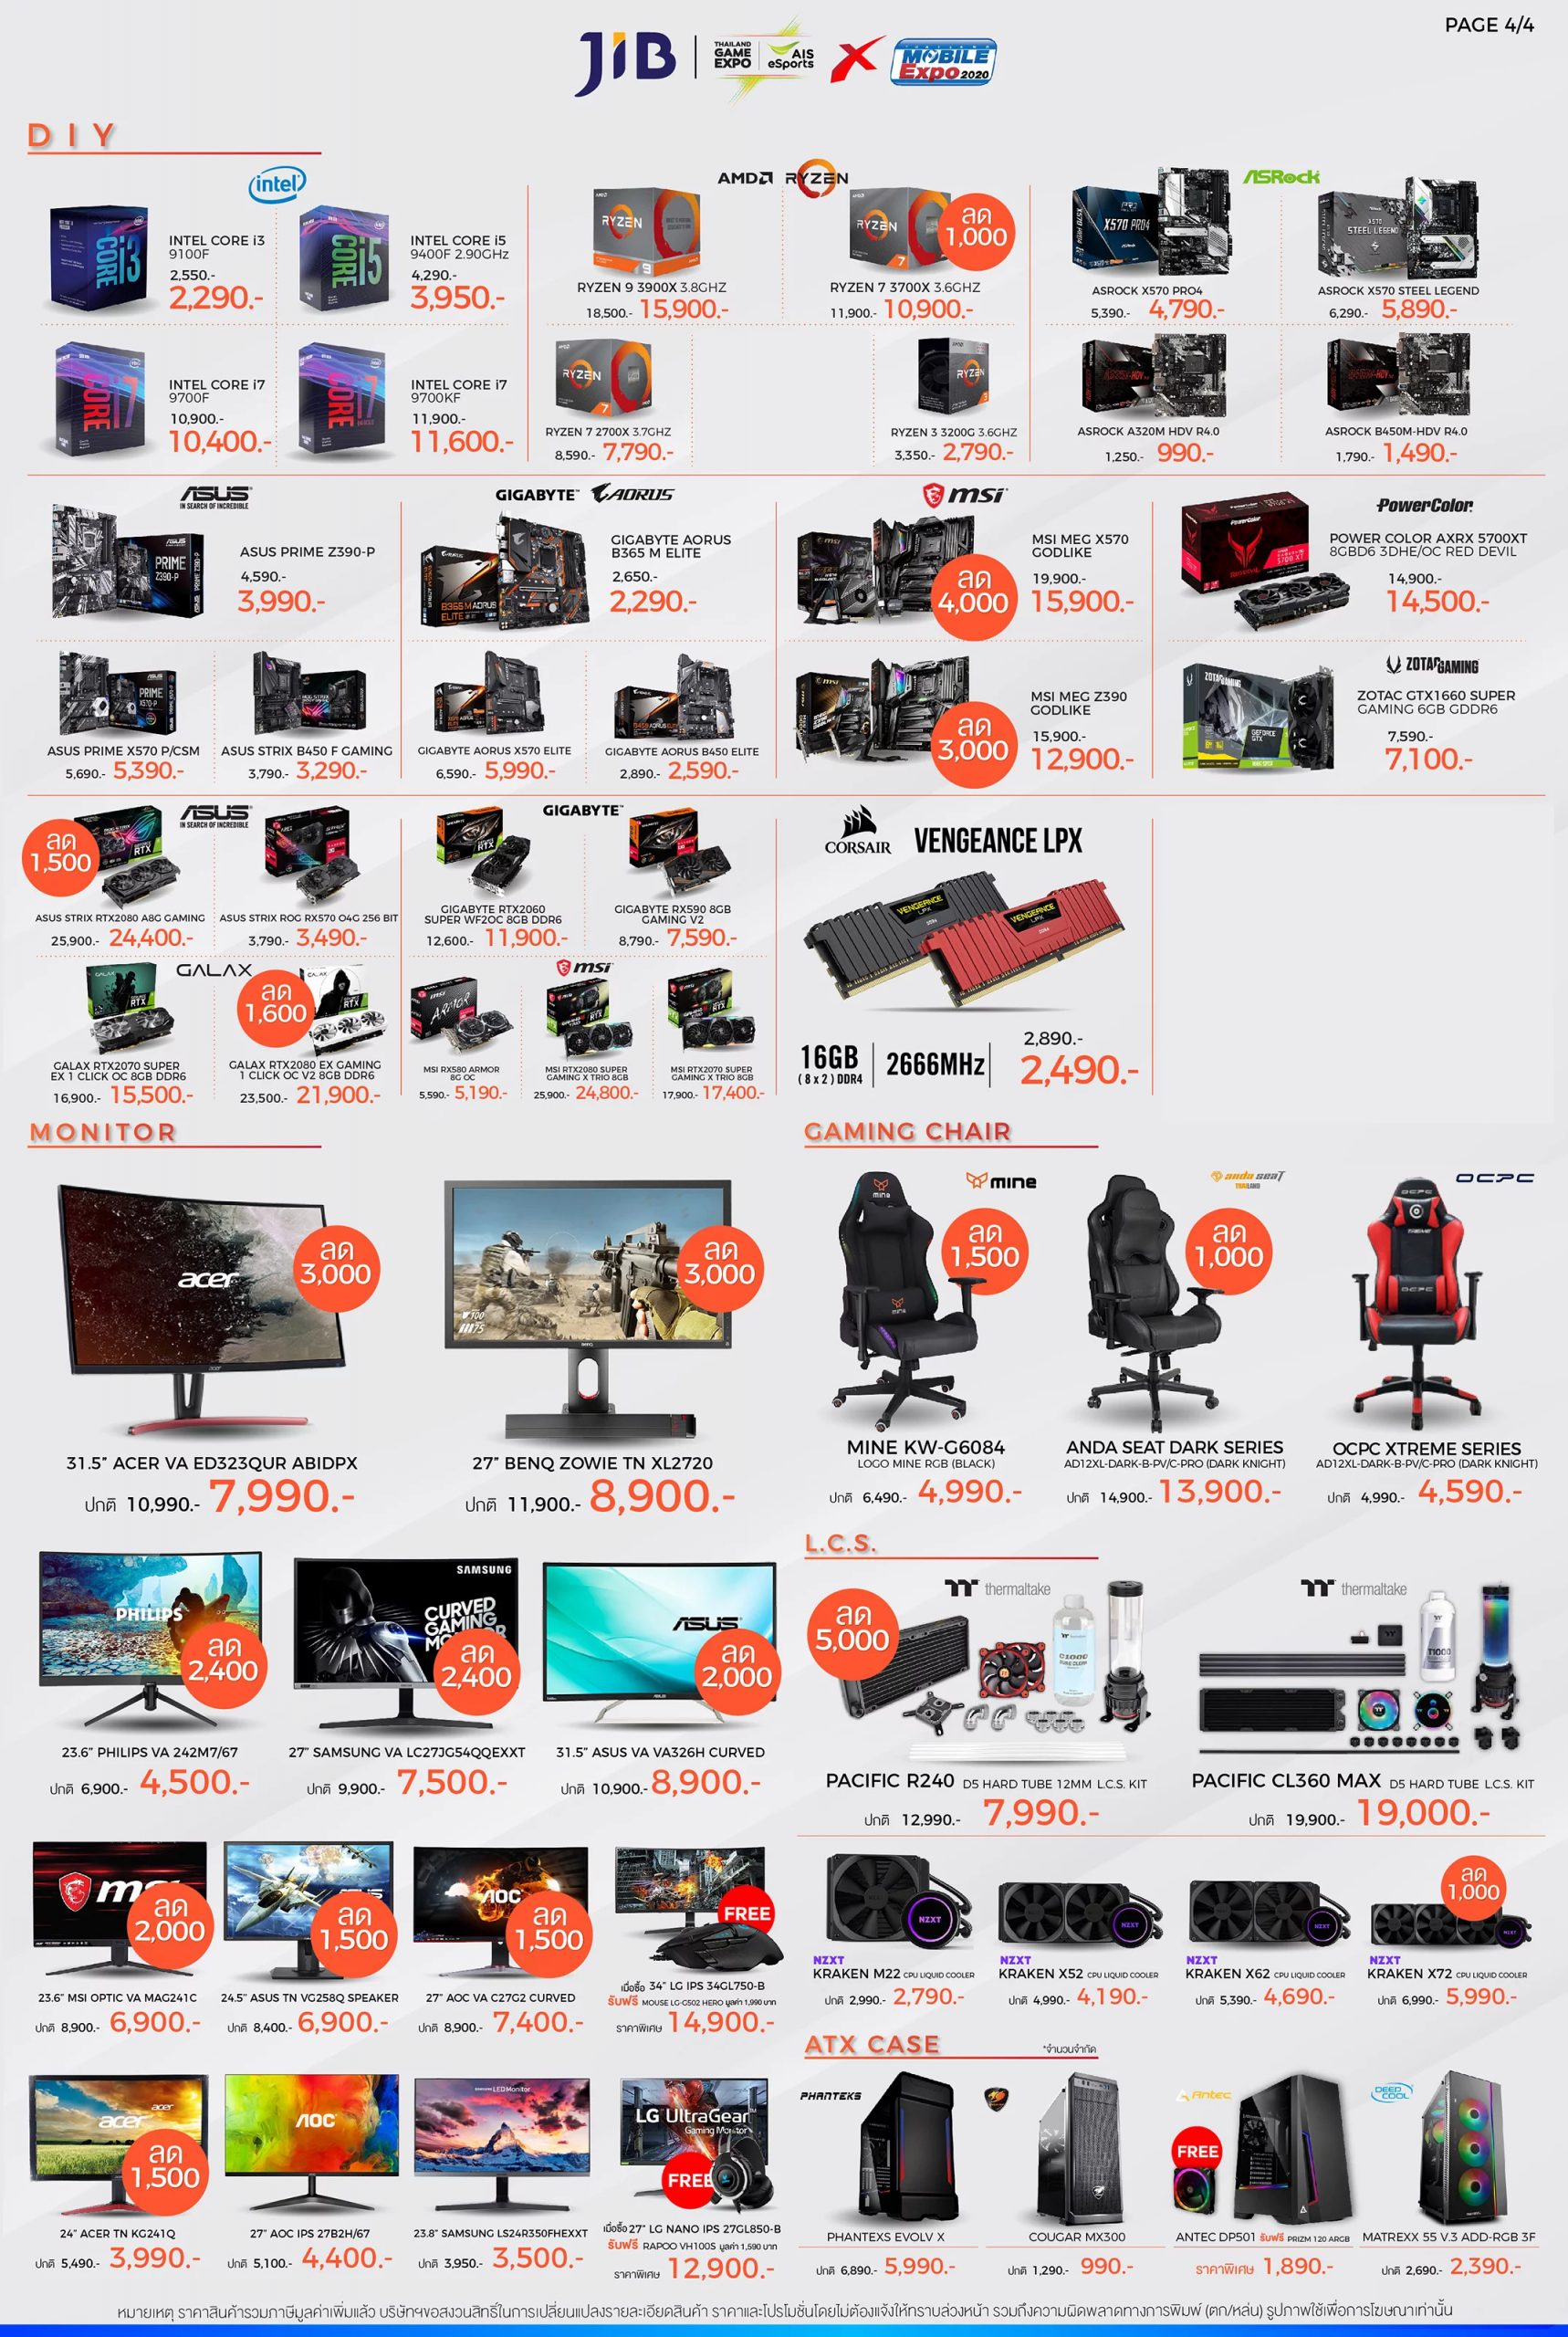 promotion-jib-thailand-game-expo-x-mobile-expo-2020-jan